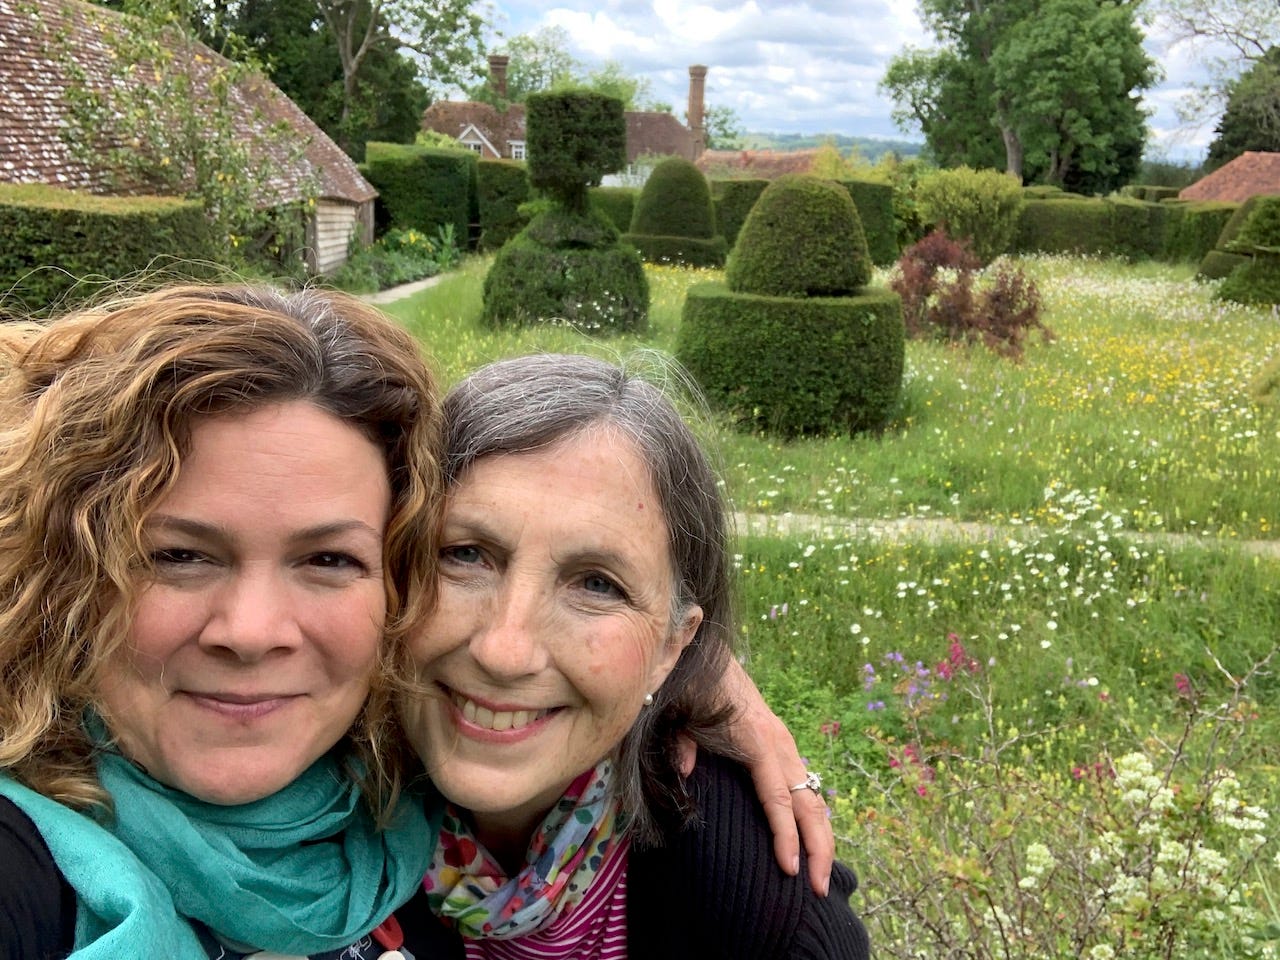 Marcella Hawley and Sharyn Sowell near the Topiary Lawn at Great Dixter. Photo by Marcella Hawley